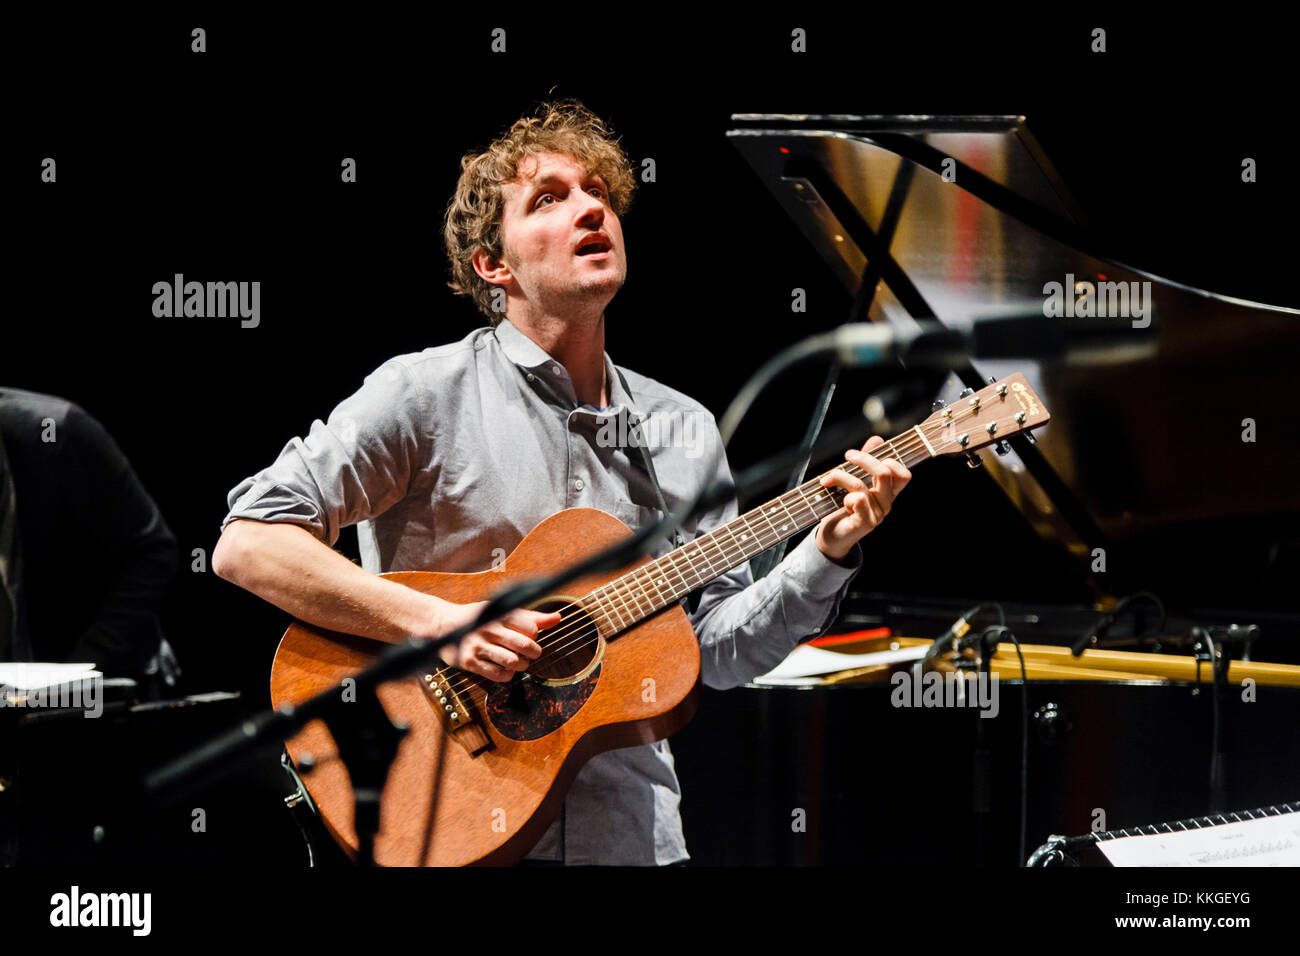 Sam Amidon rehearsing on stage at the Lawrence Batley Theatre during the Huddersfield Contemporary Music Festival, 2017 Stock Photo